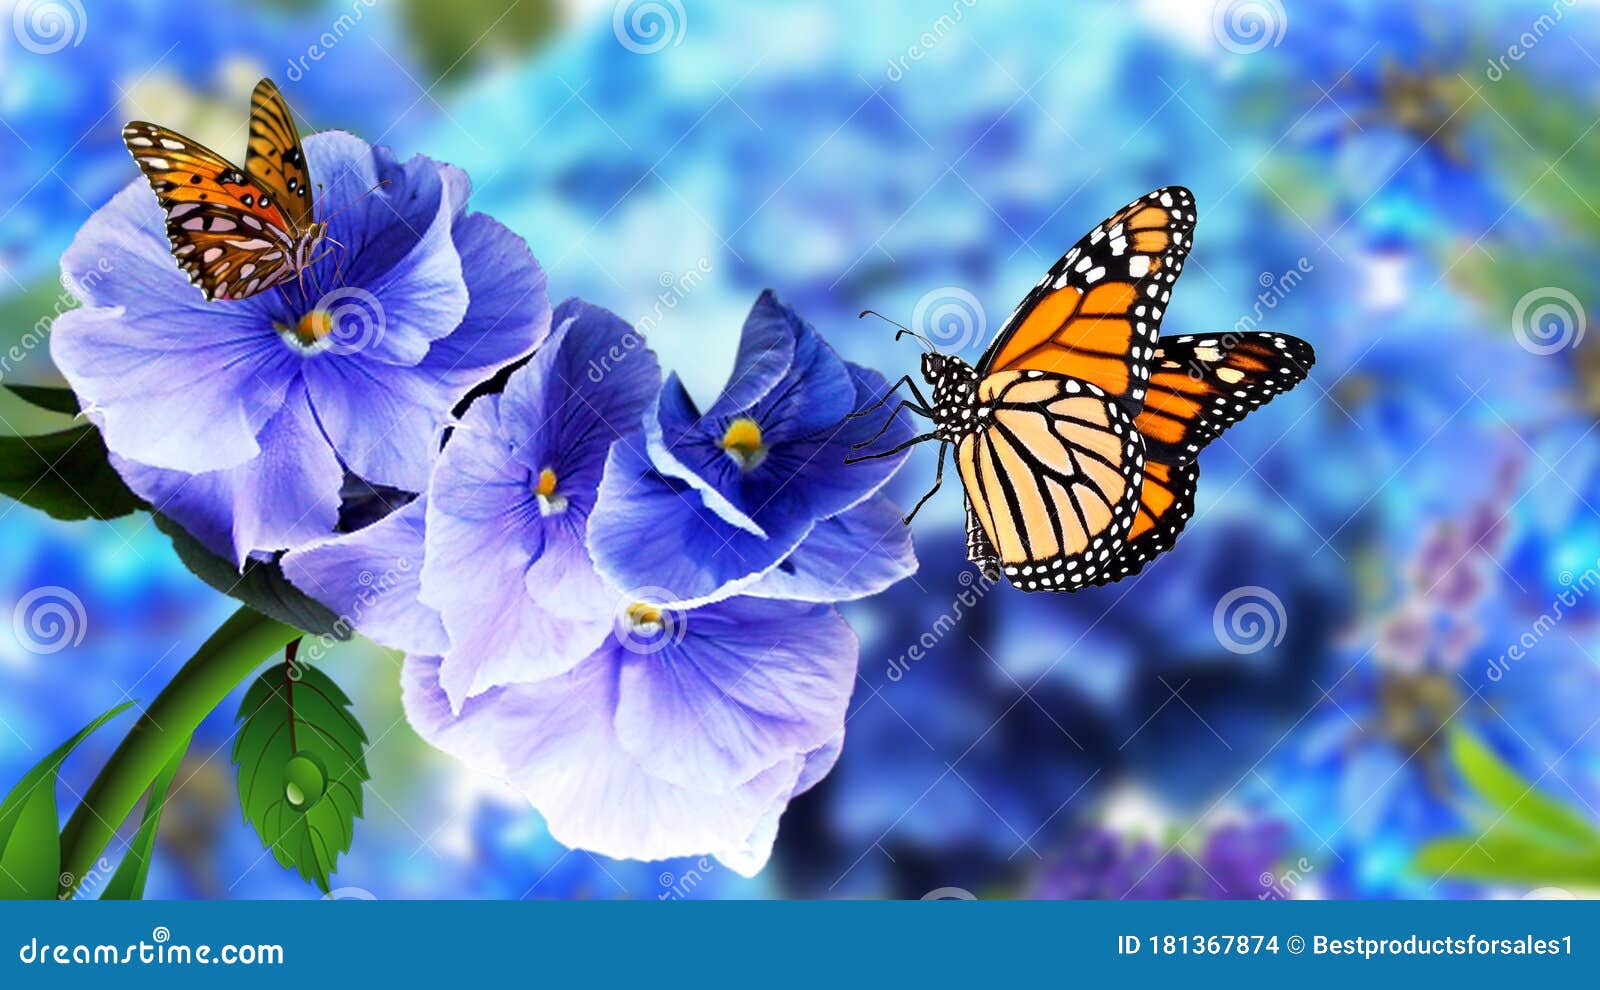 Butterfly on Flowers with Blurry Natural Background. Beautiful Butterfly  Flower Images Stock Photo - Image of white, yellow: 181367874